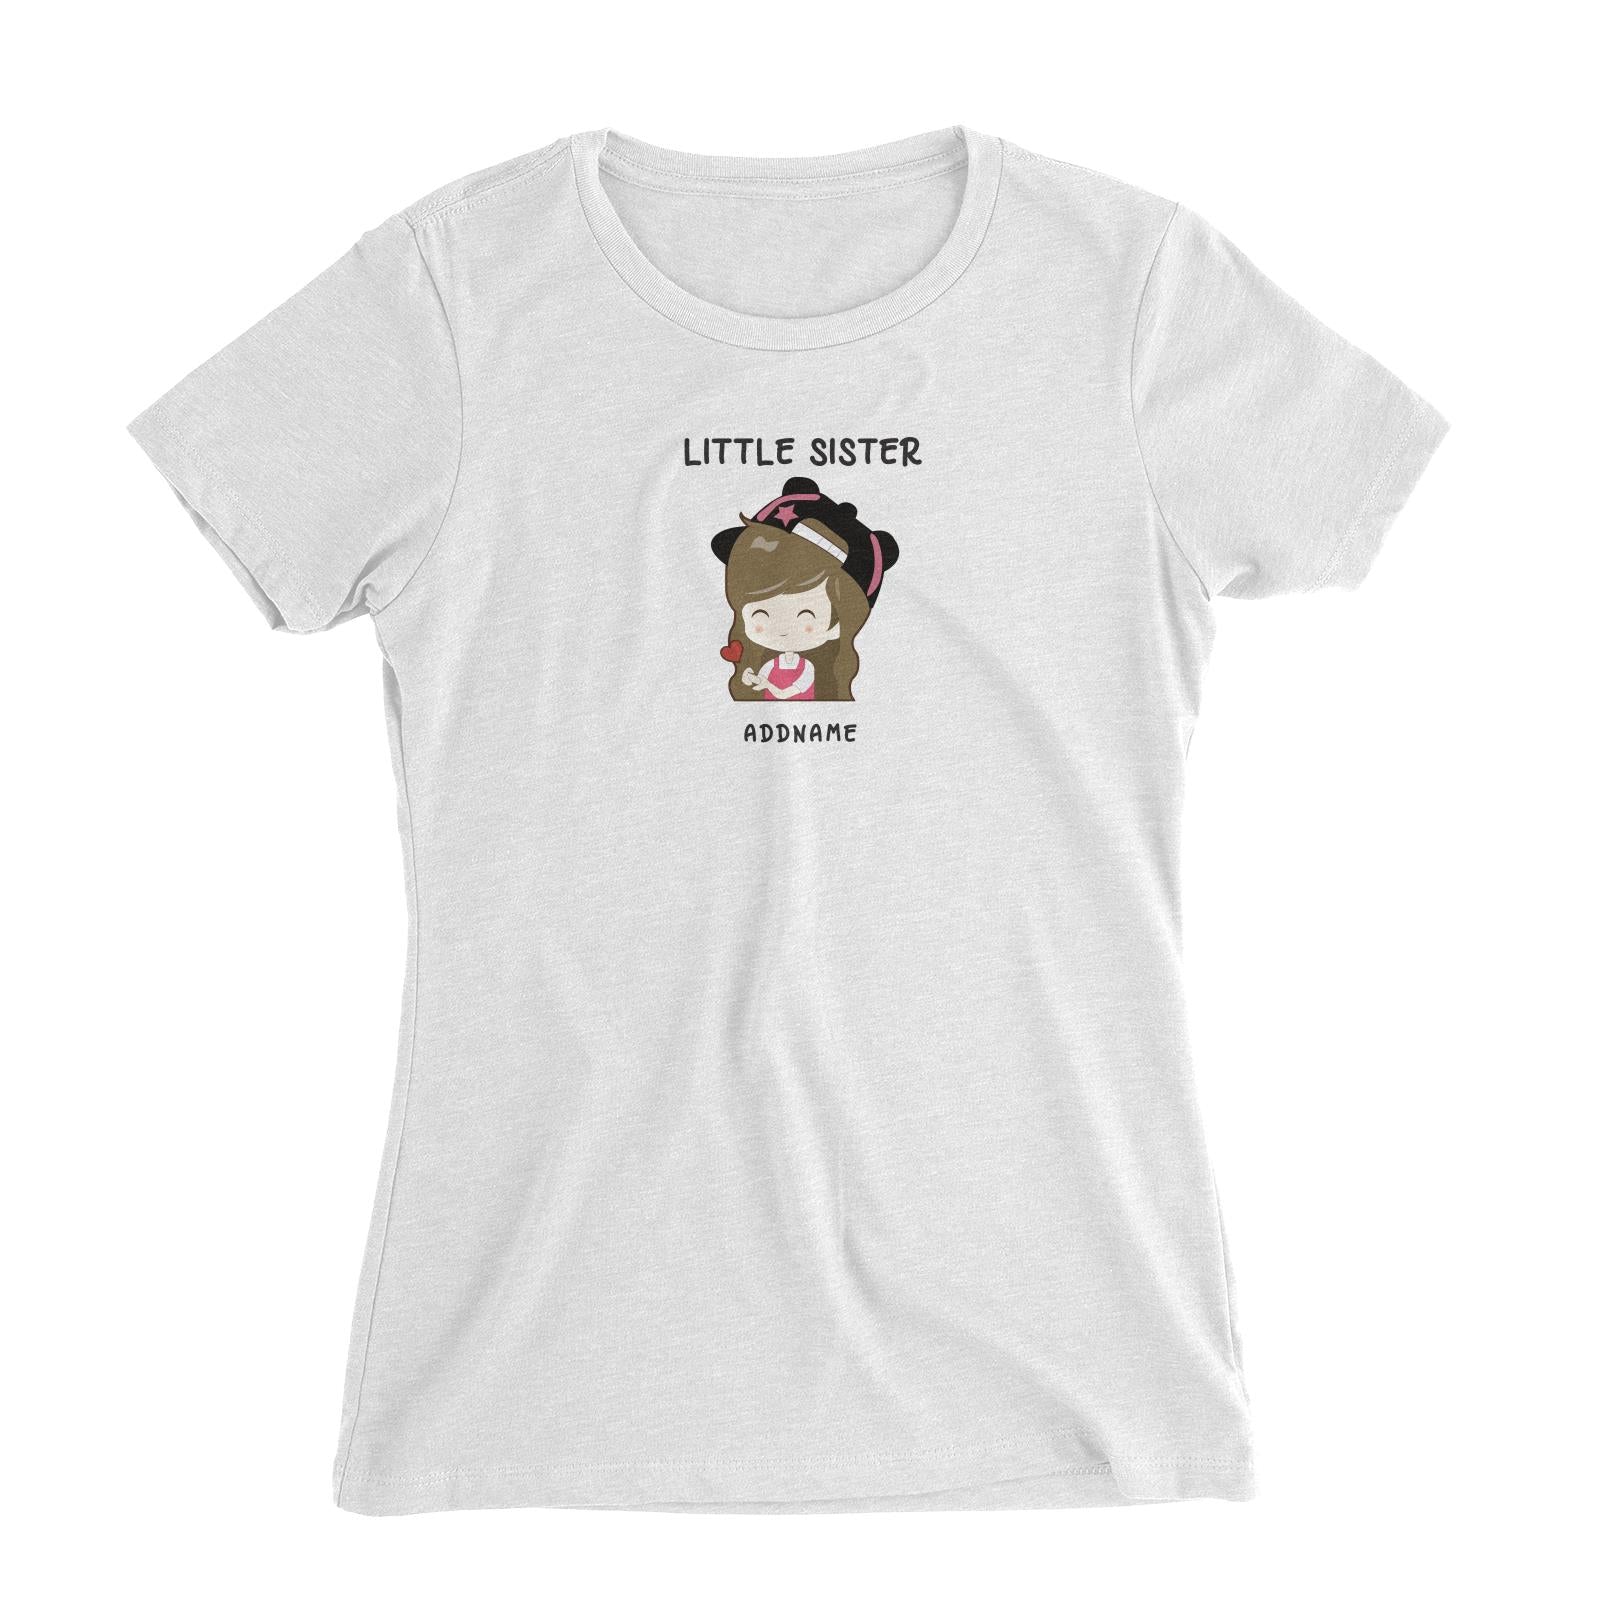 My Lovely Family Series Little Sister Addname Women Slim Fit T-Shirt (FLASH DEAL)